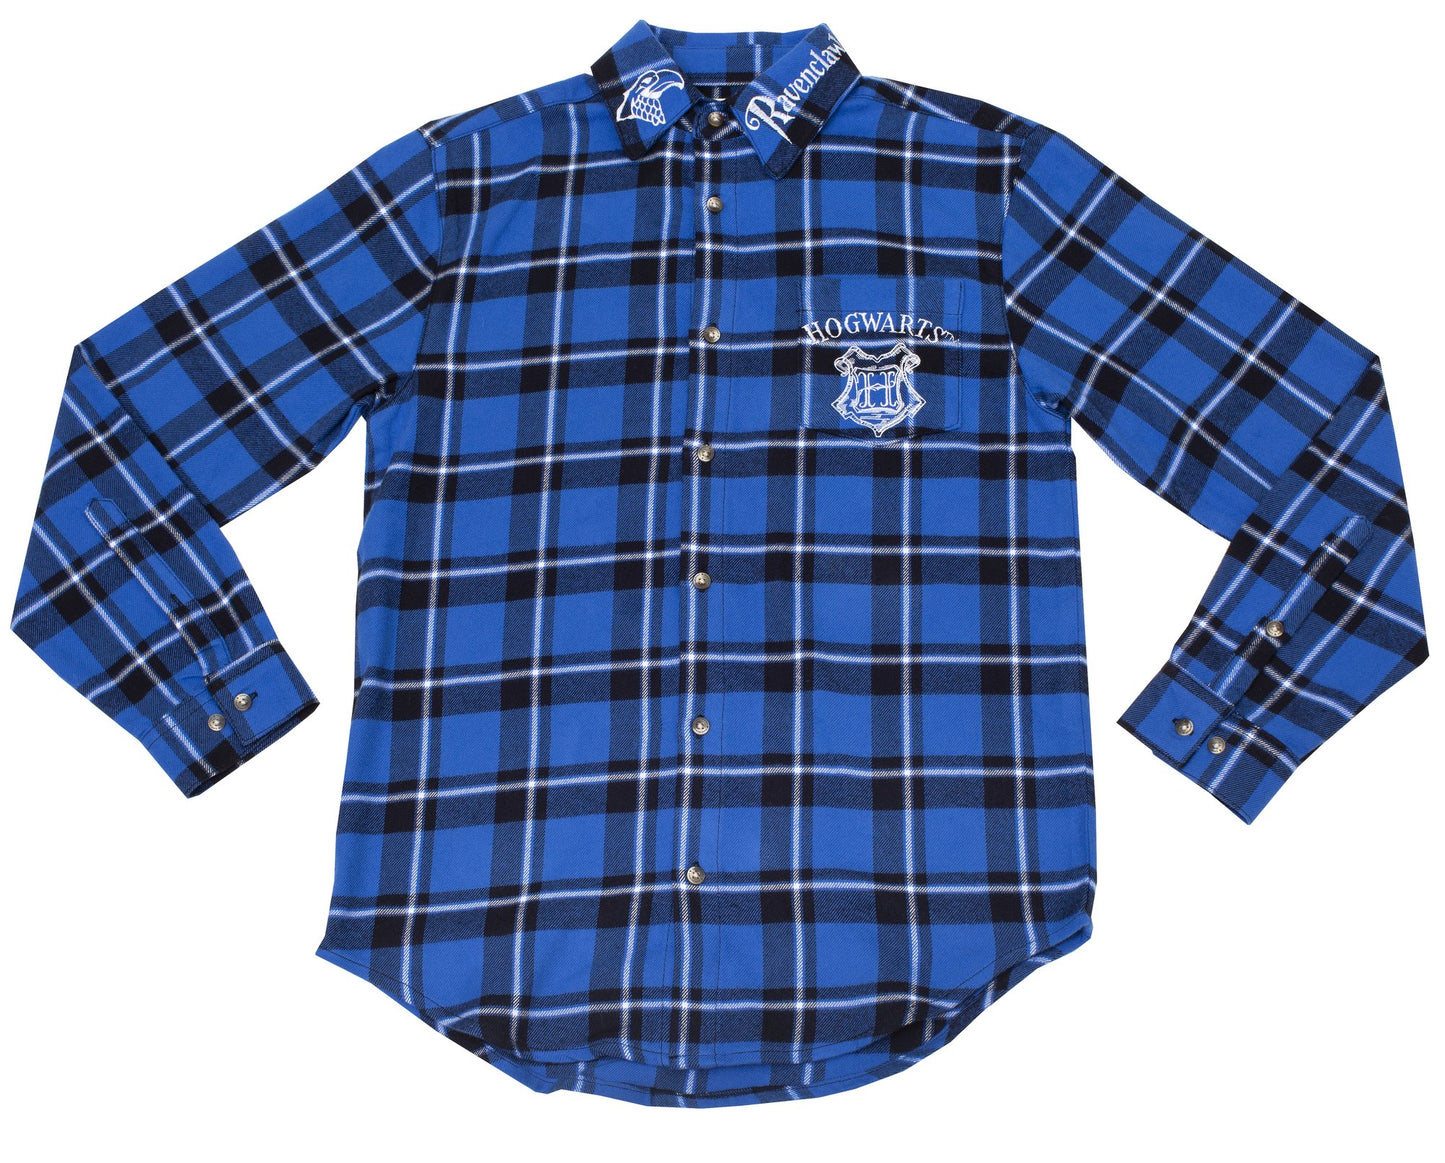 Load image into Gallery viewer, Ravenclaw House Crest (Harry Potter) Flannel Shirt by Cakeworthy
